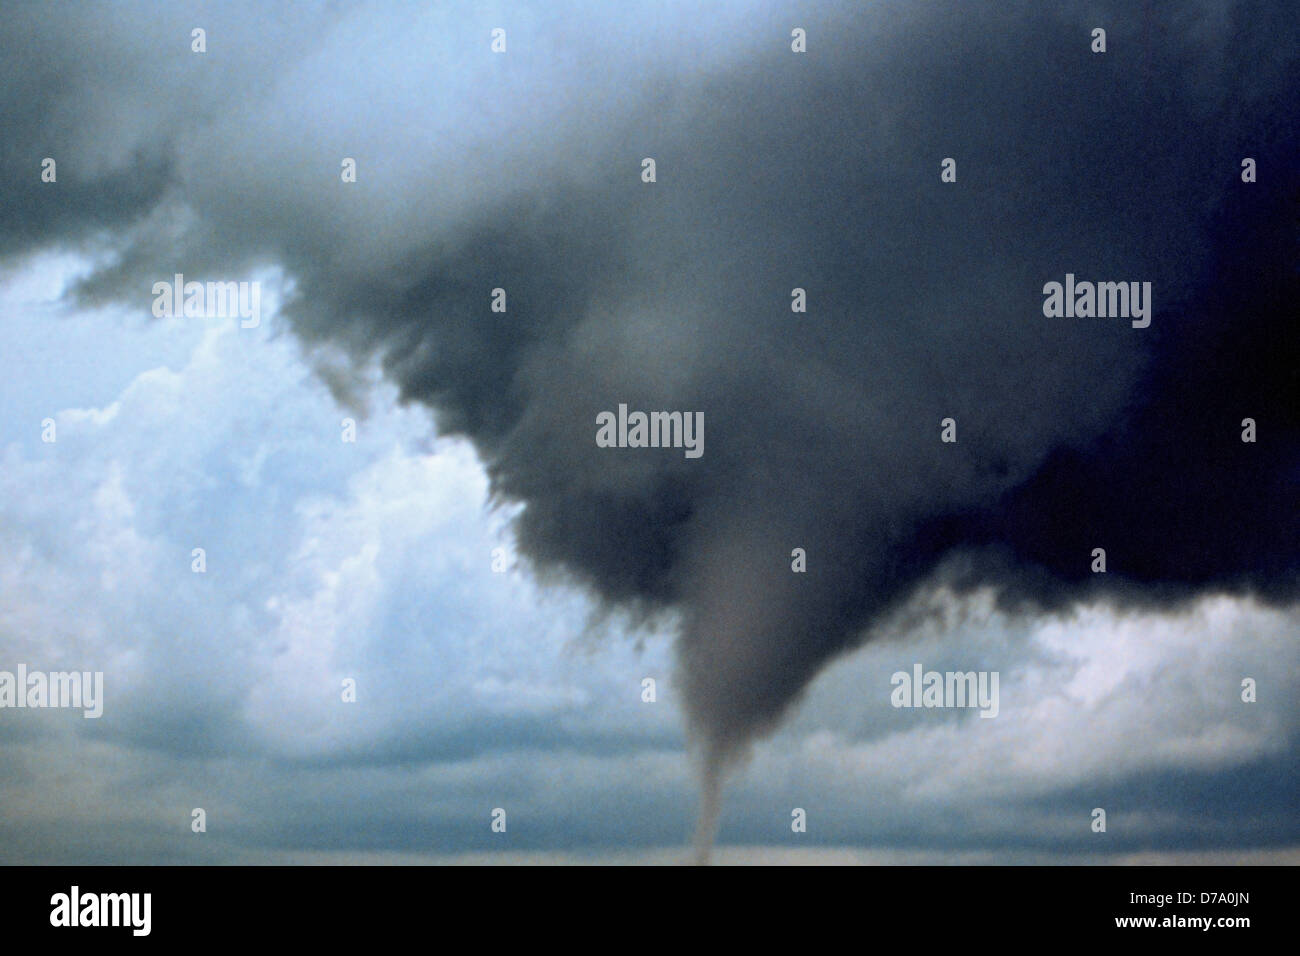 Occluded Mesocyclone Tornado Rated F3 Stock Photo